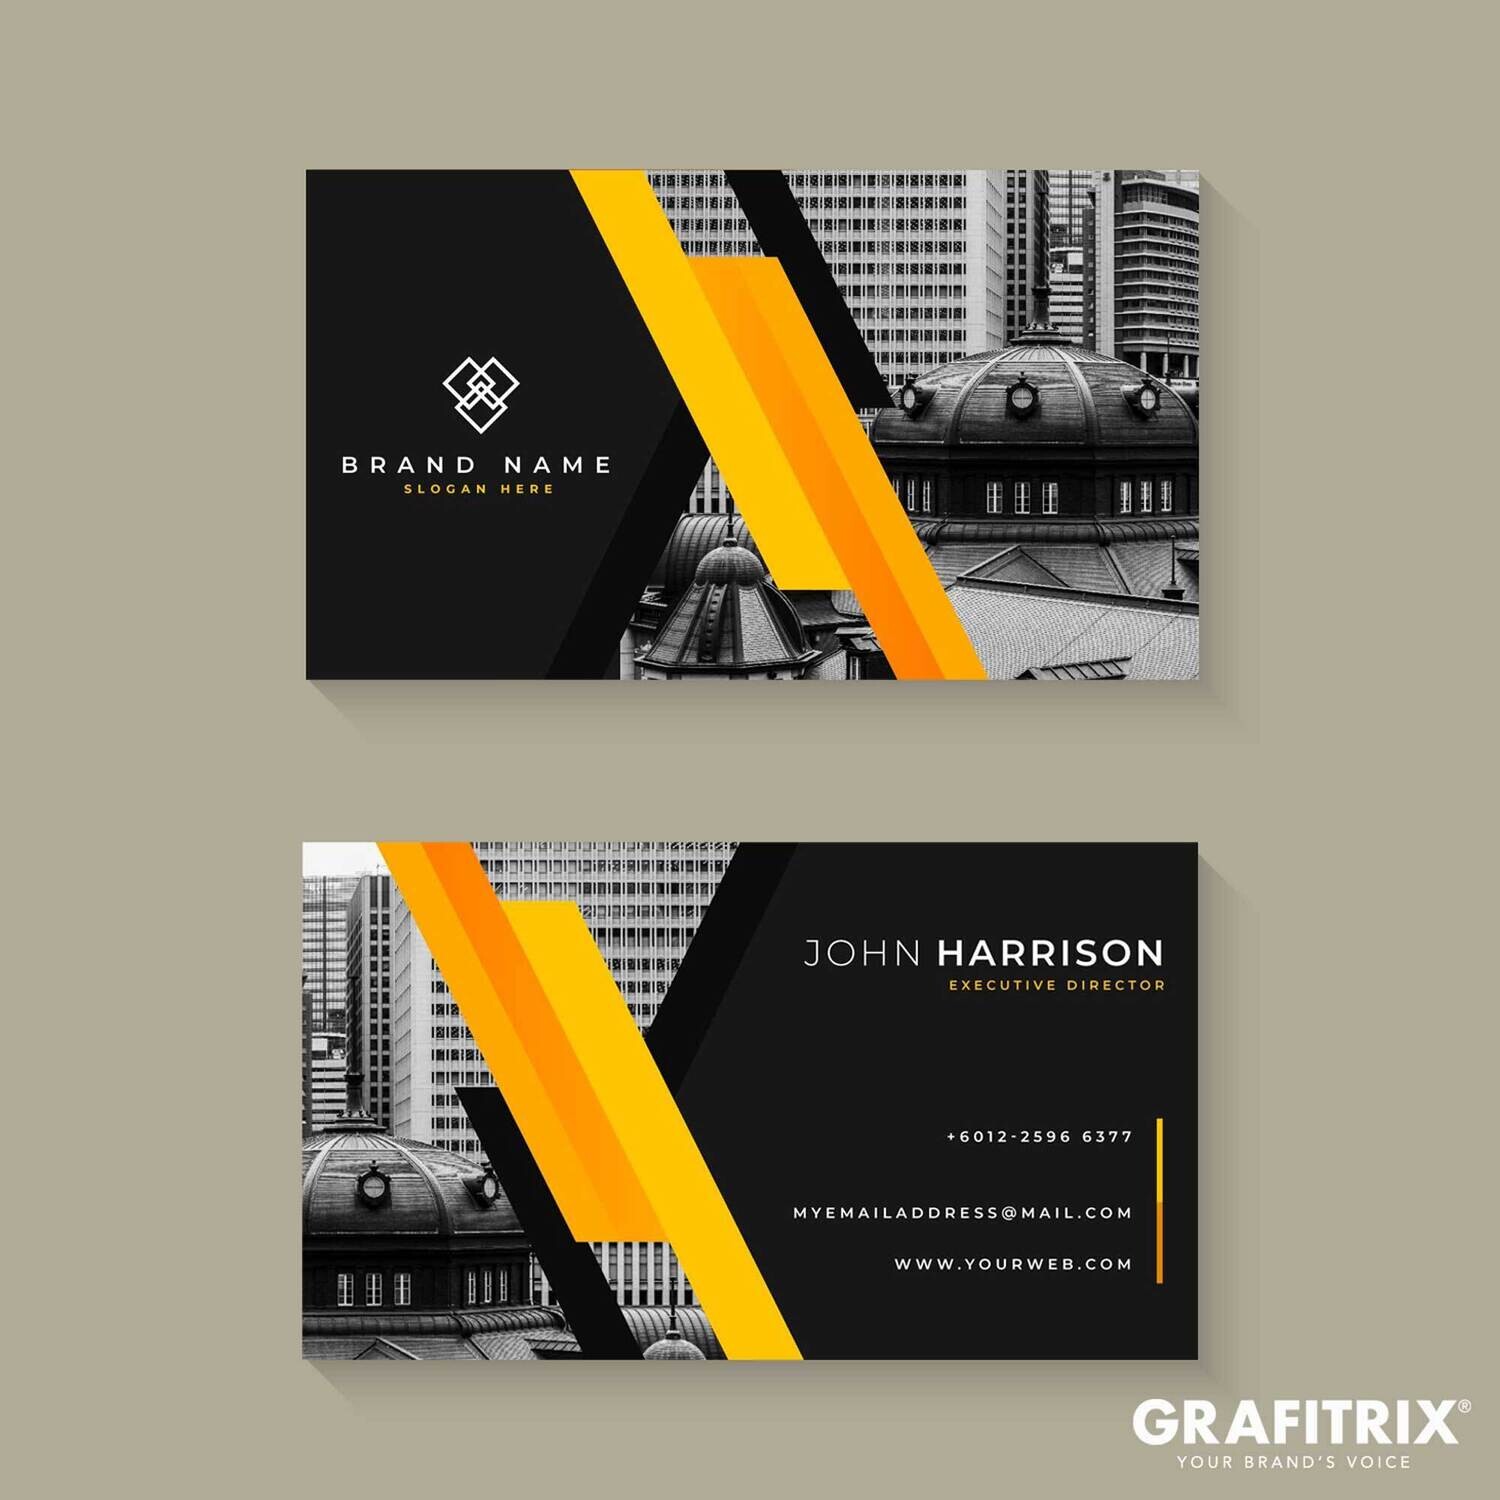 Business Cards A041